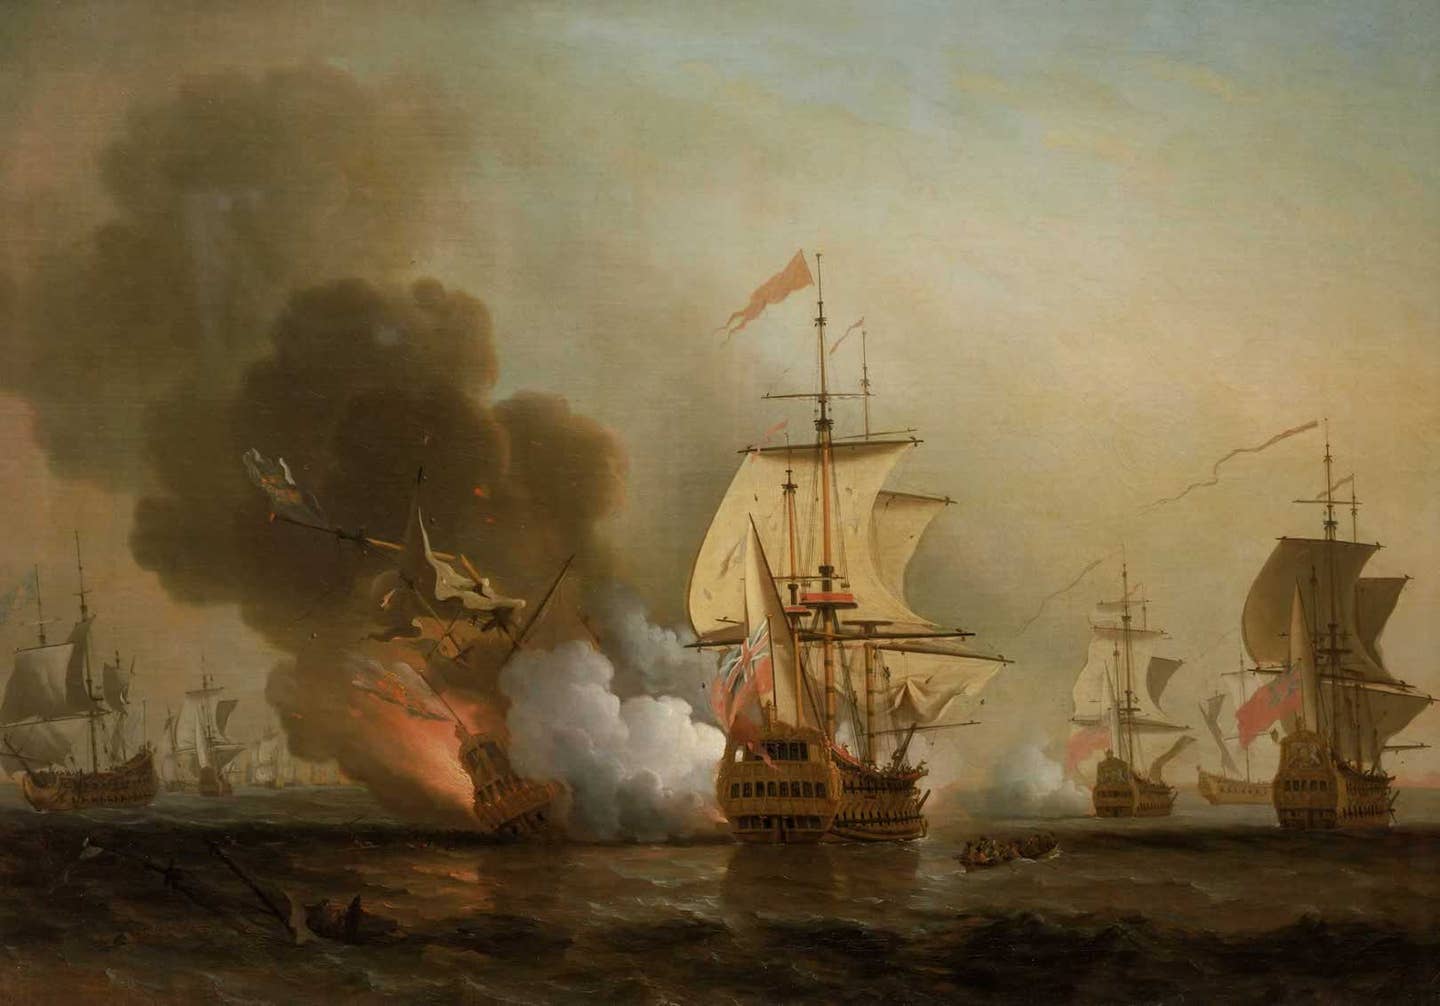 A British tallship blows away a Spanish galleon in an 18th-century painting